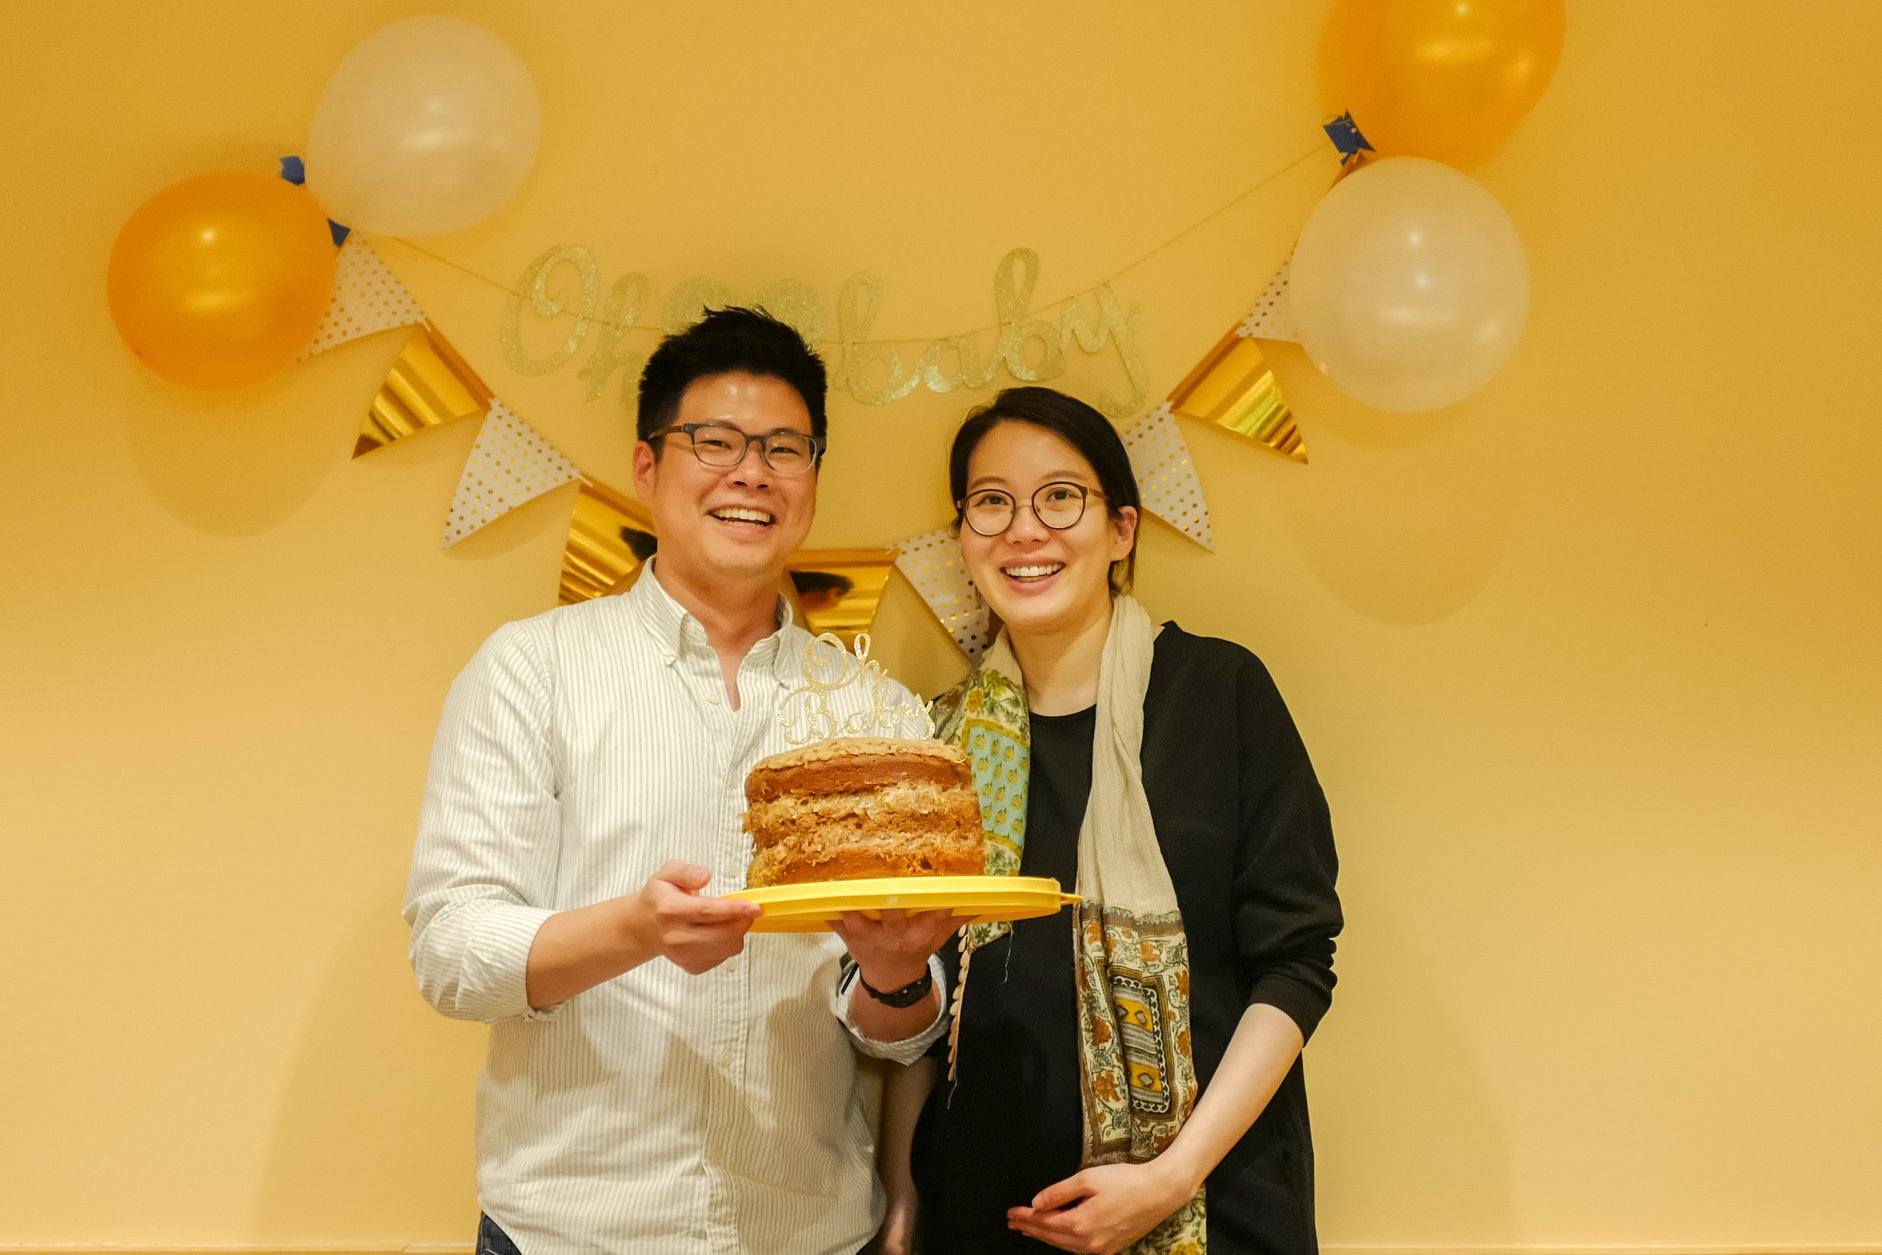 photo of couple holding a cake in front of balloons